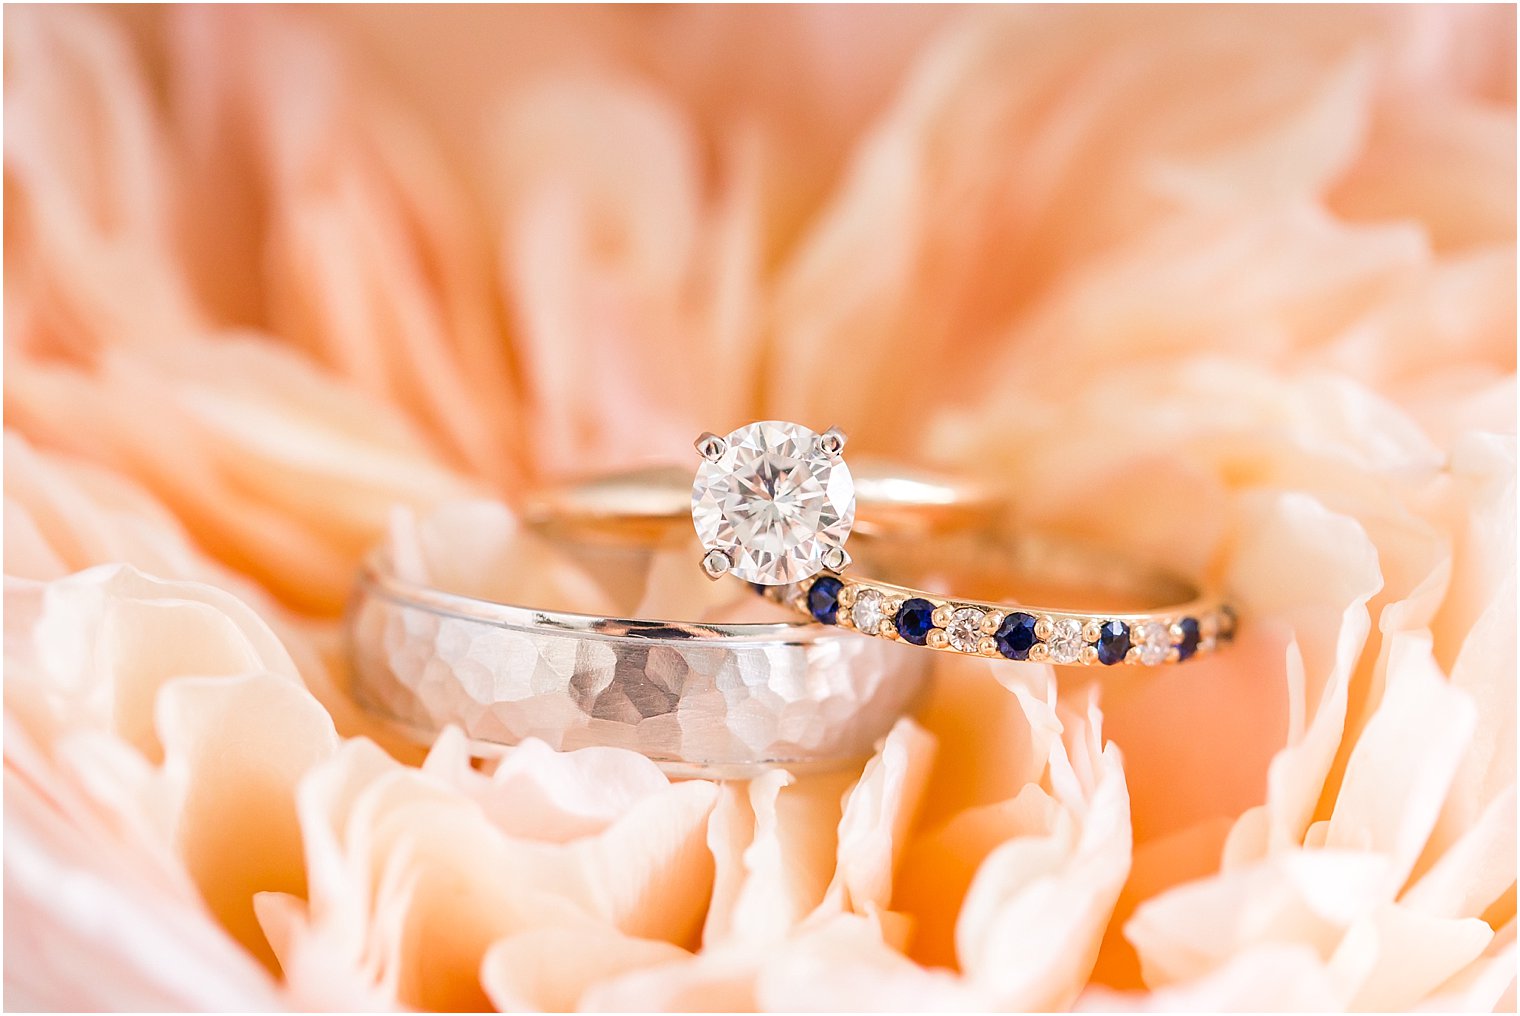 Wedding rings in peach flower; wedding band with blue sapphire